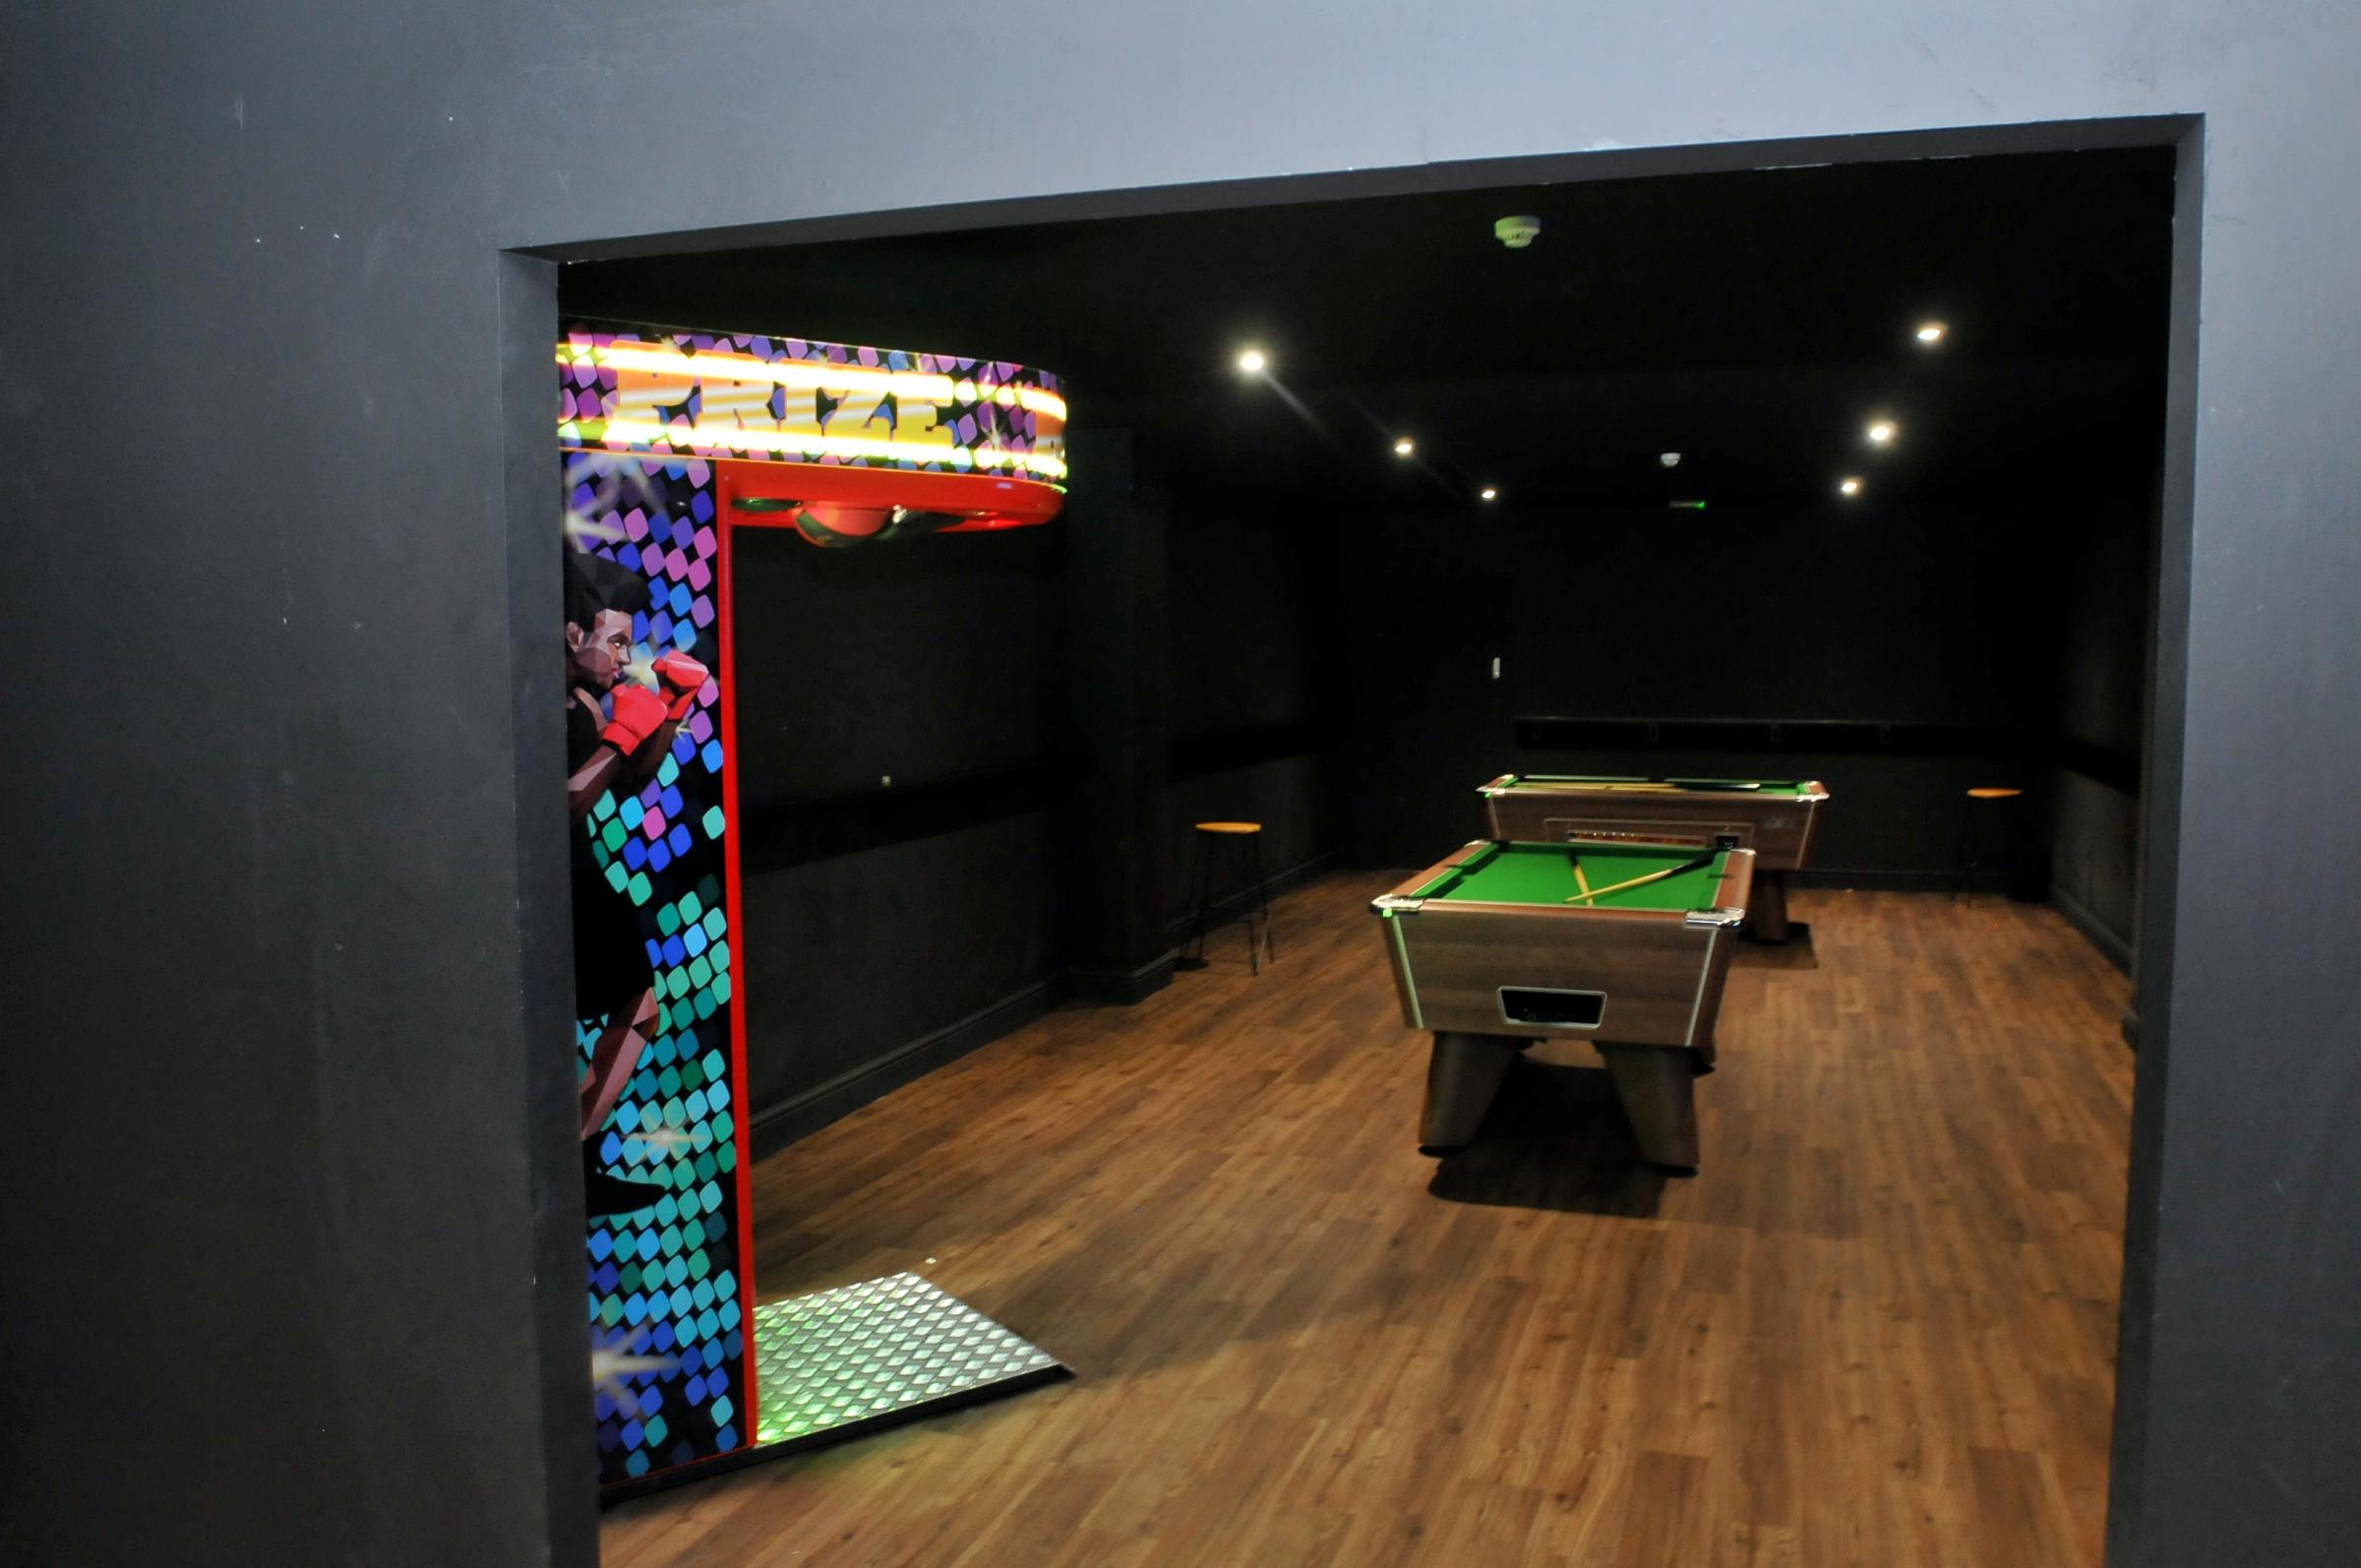 You can find further pool tables to the right